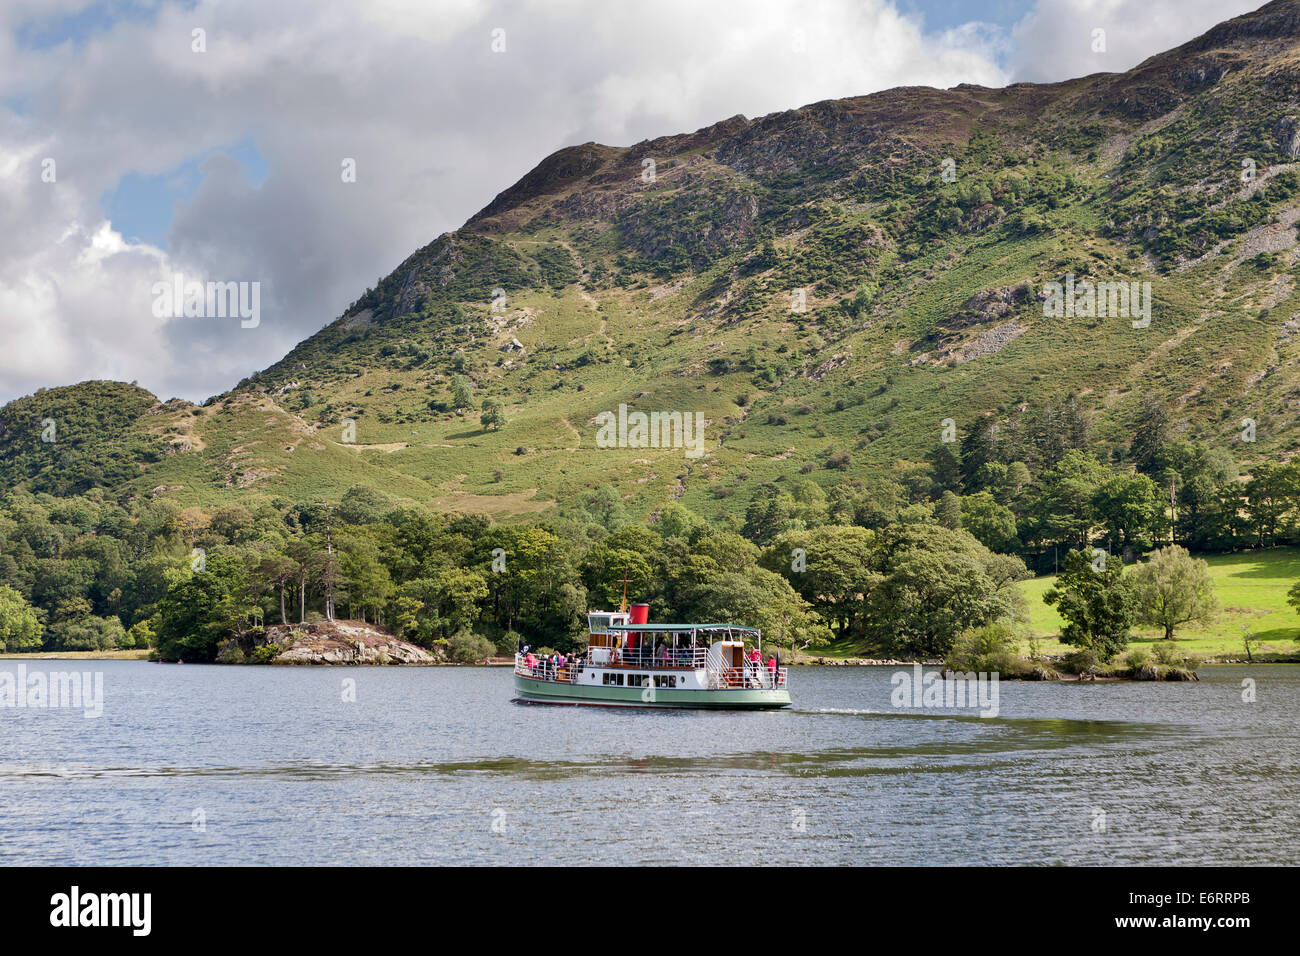 Ullswater Steamer M V Western Belle from behind in the distance with the Fells in the background, Cumbria Lake District England Stock Photo